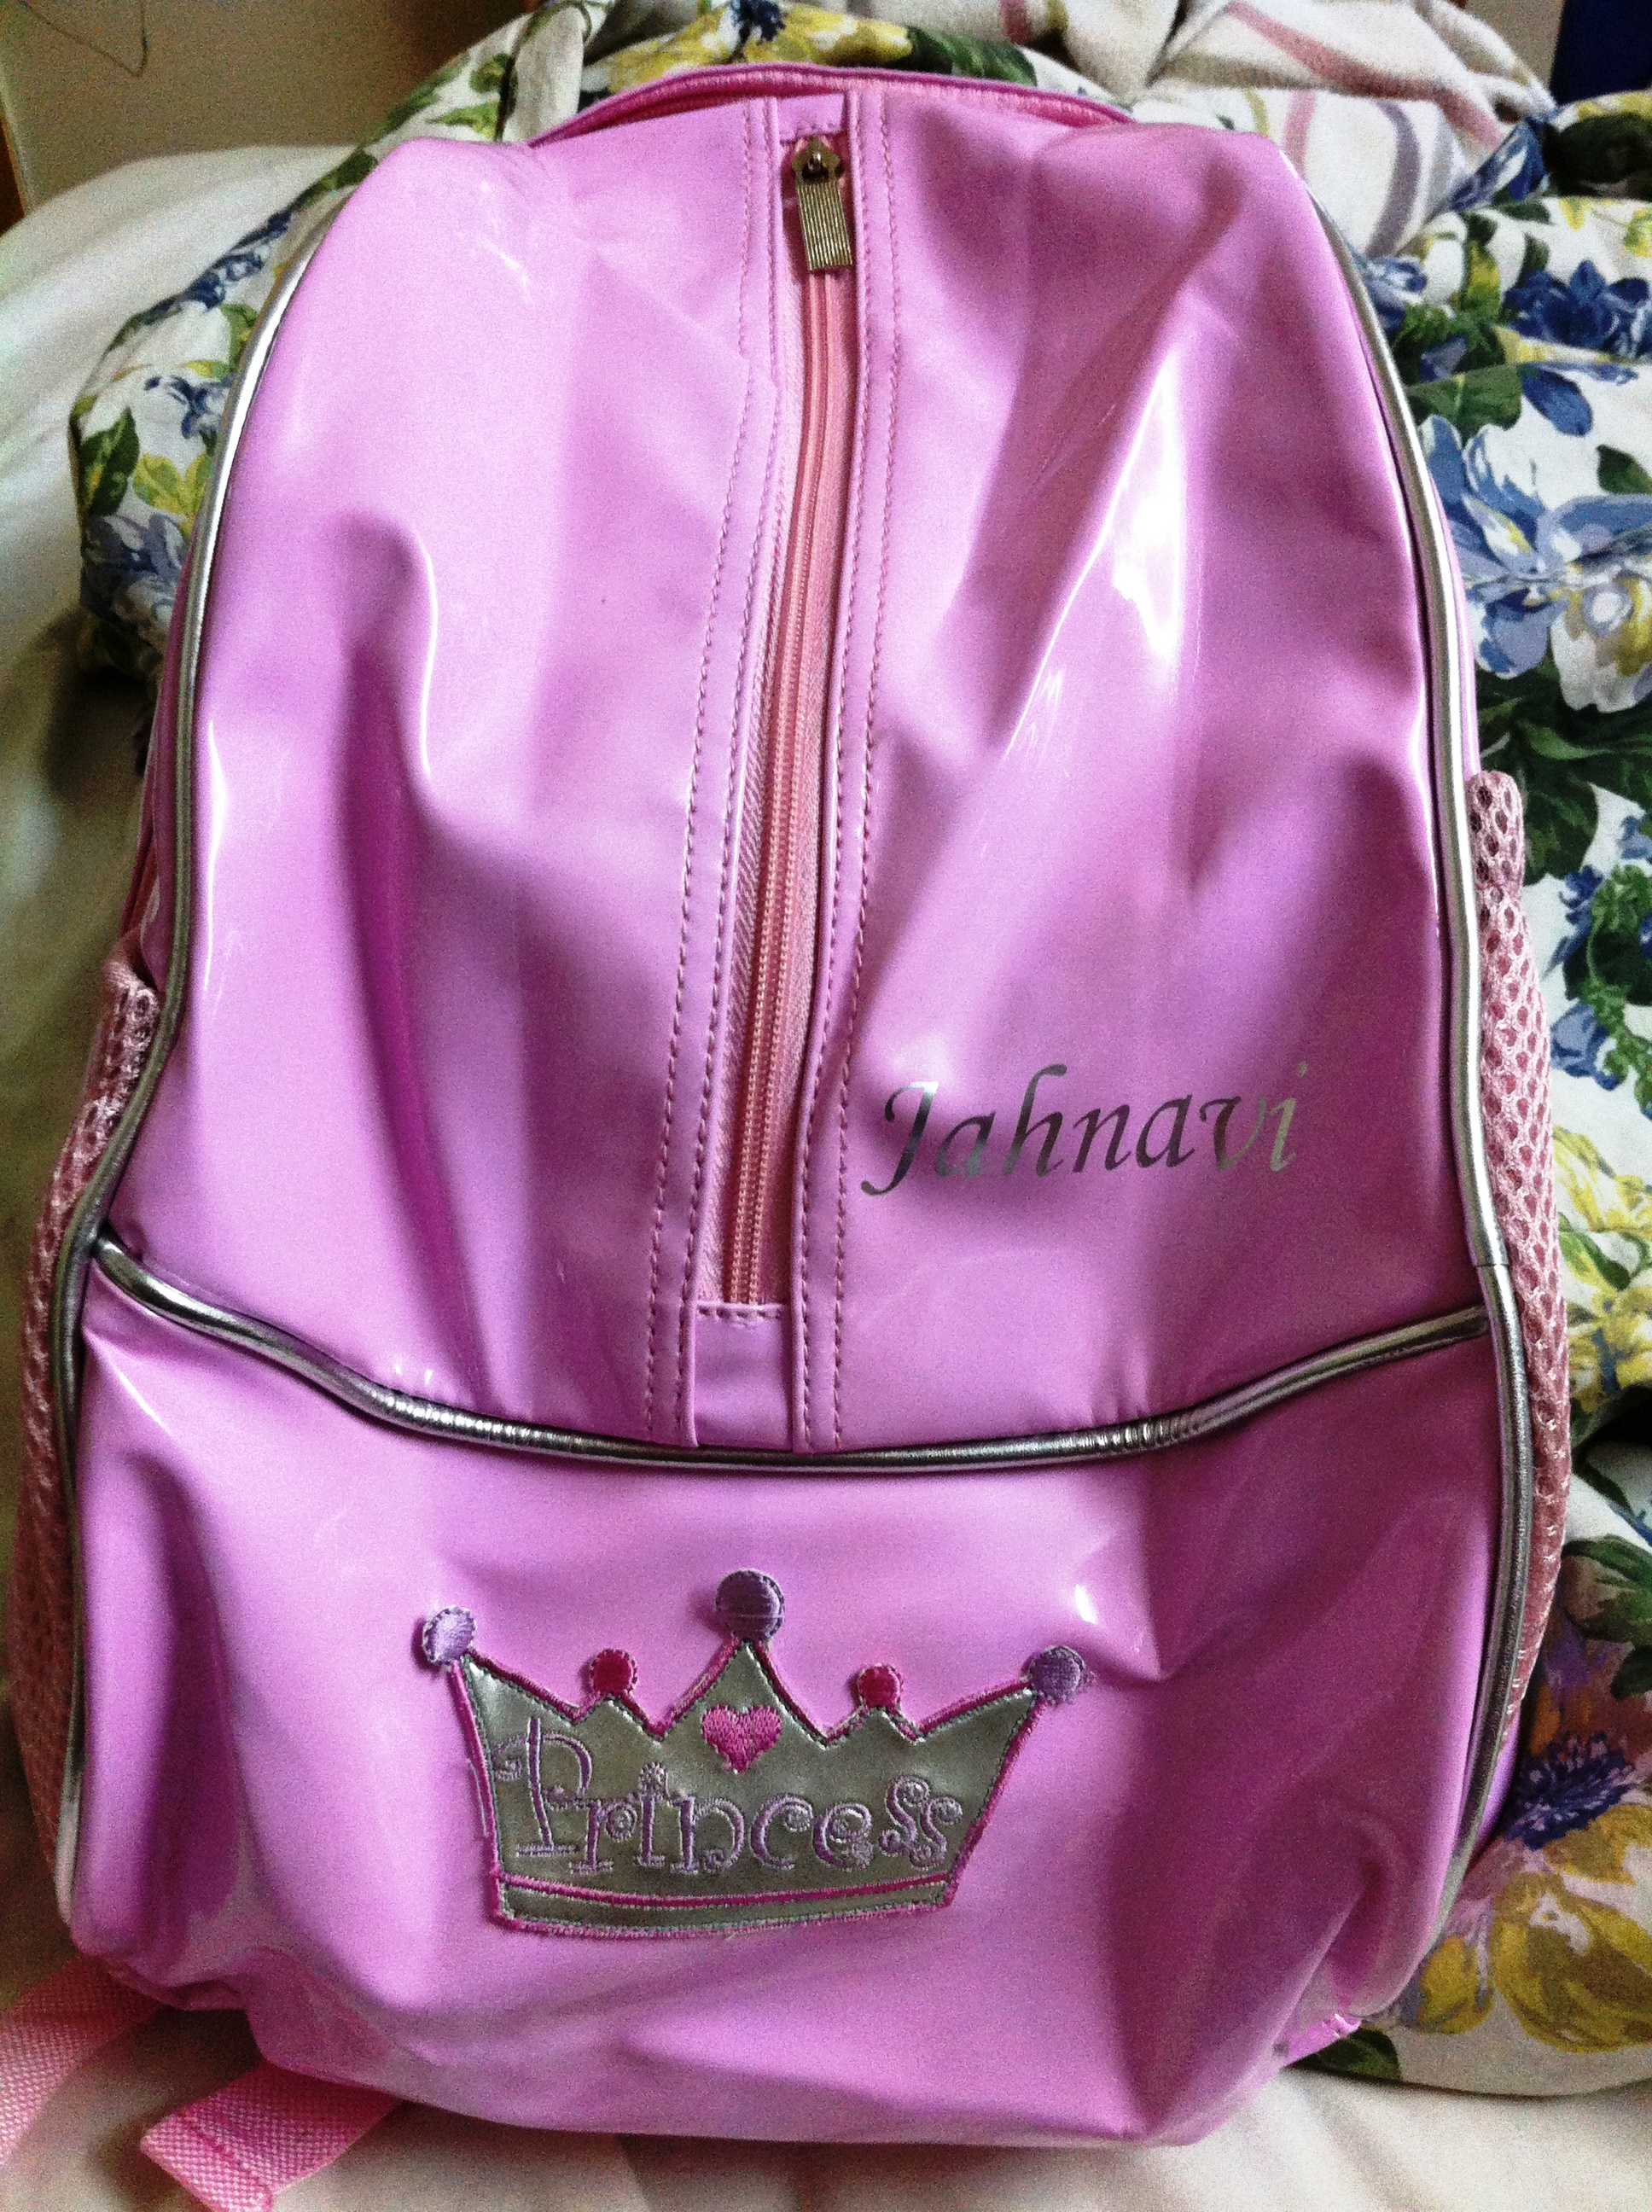 The return gift - a backpack embossed with the snubnose's name and a little crown saying "Princess"